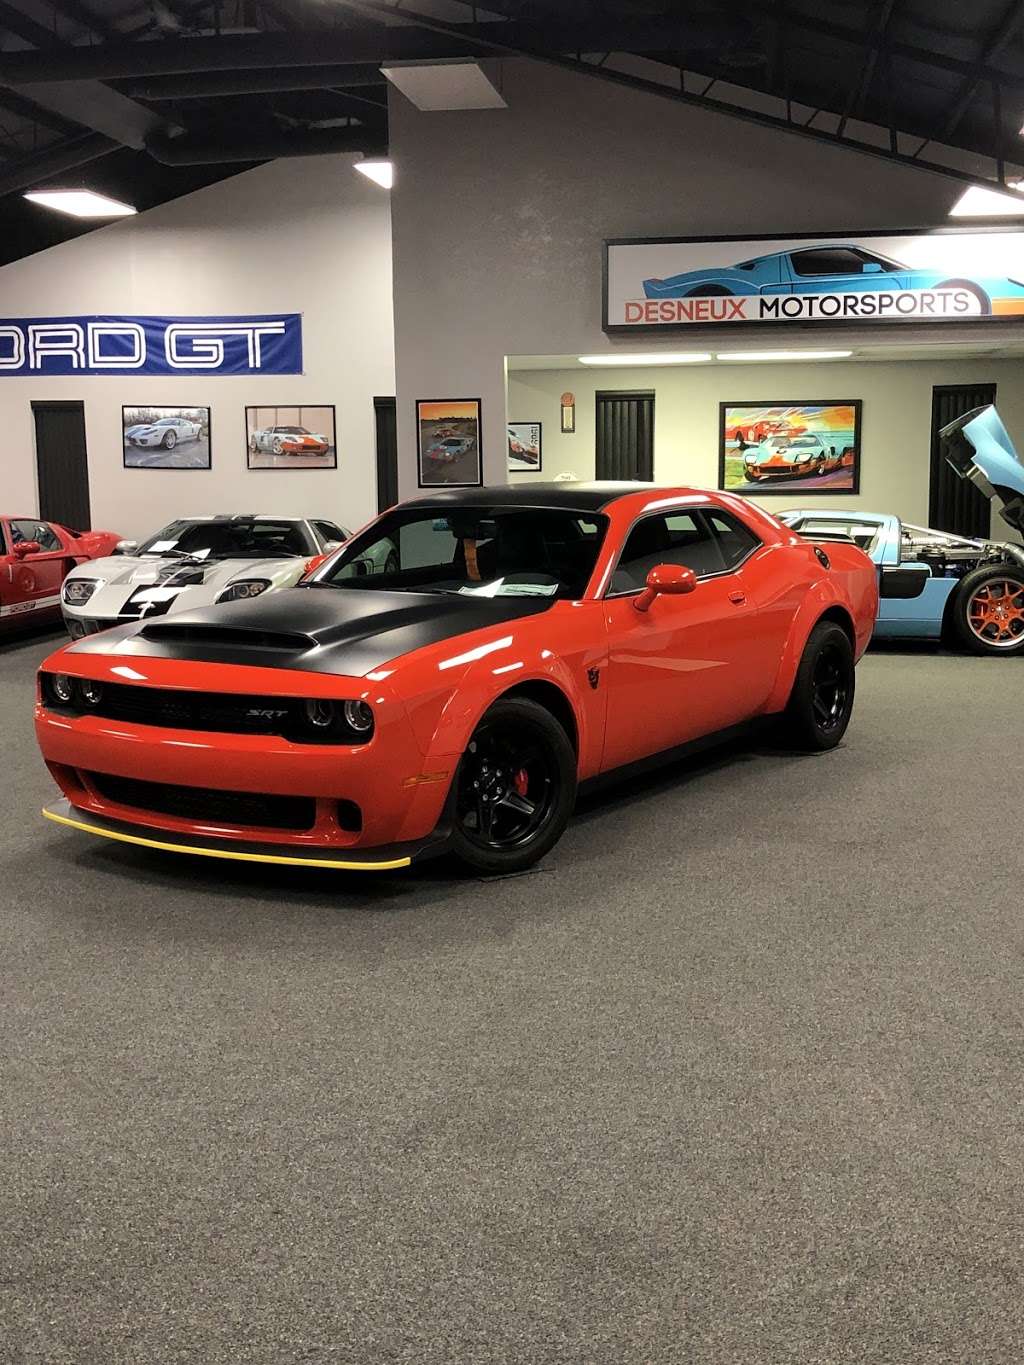 DESNEUX MOTORSPORTS | 11301 218th St, Peculiar, MO 64078 | Phone: (816) 365-6010